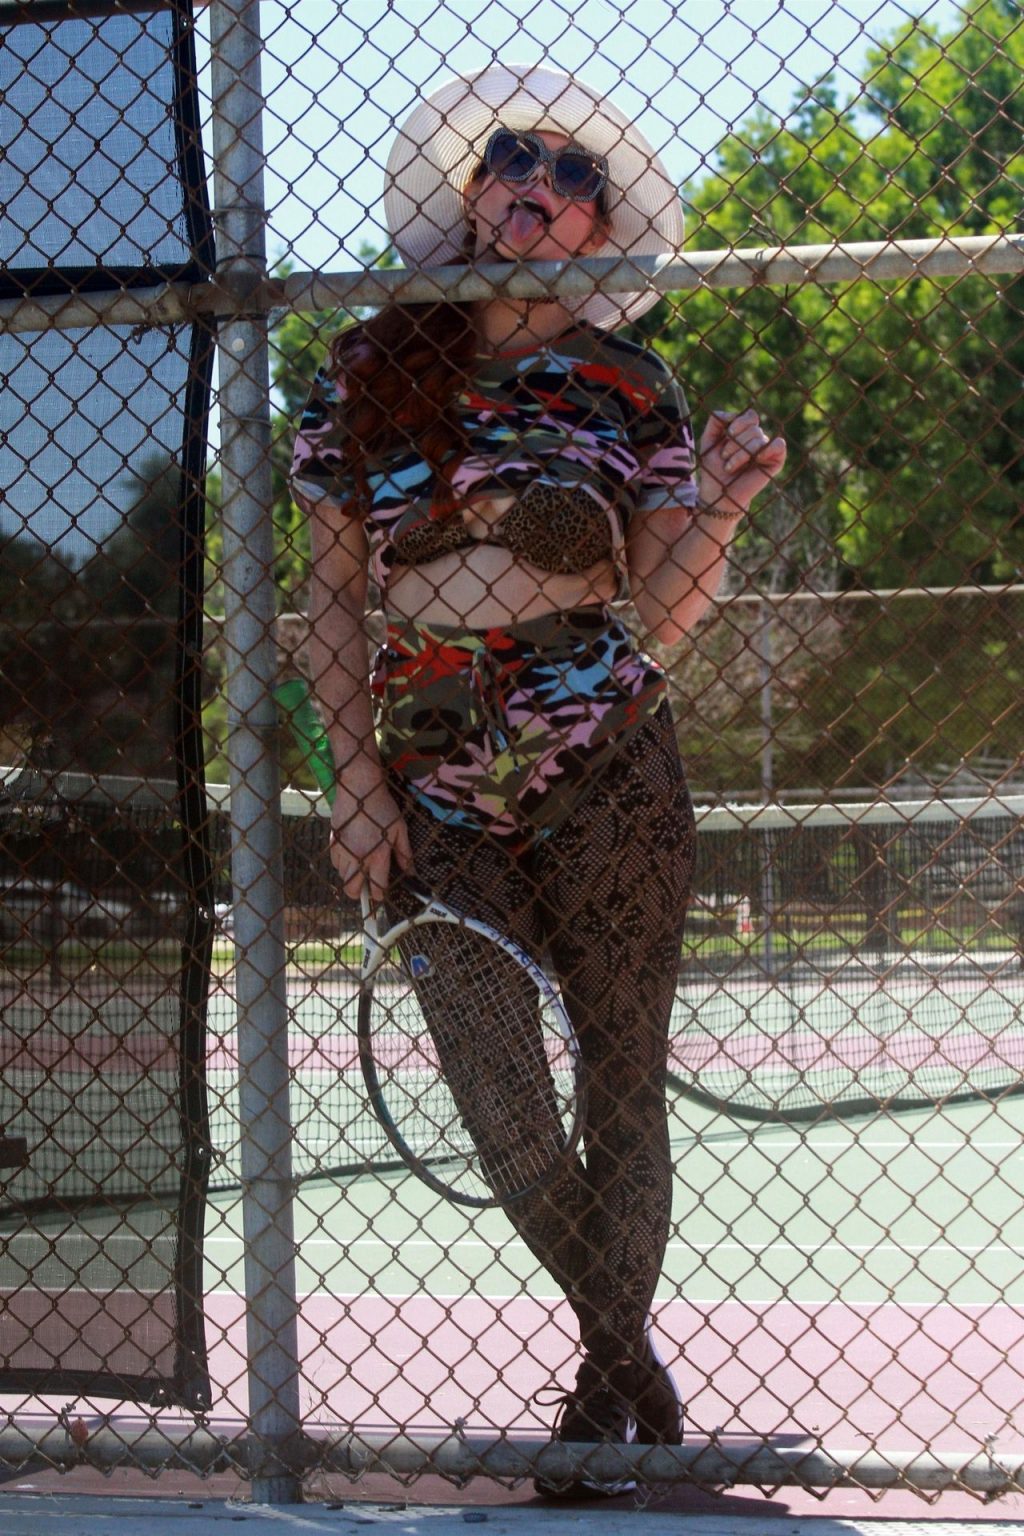 Busty Phoebe Price Is Seen Having a Lesson with Her Tennis Coach (46 Photos)